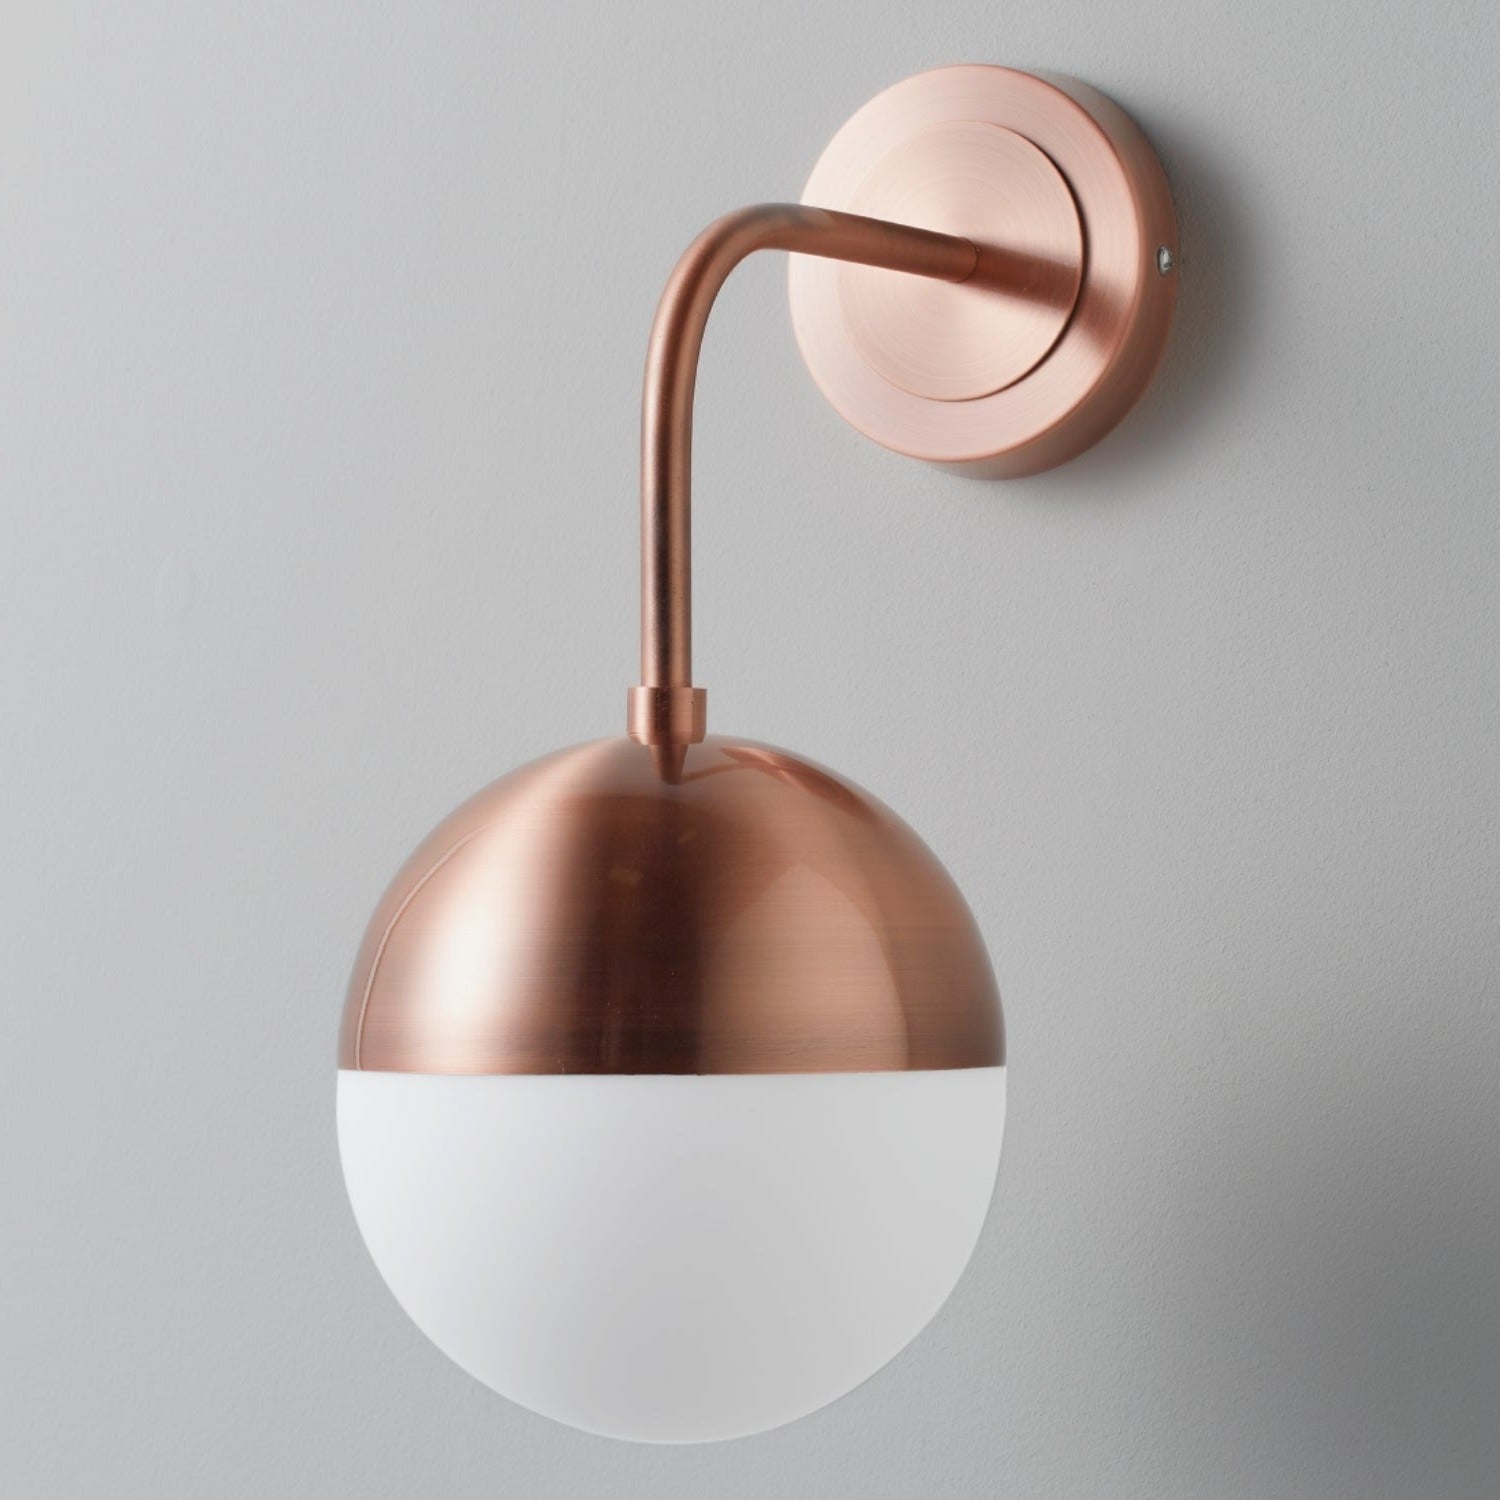 Mayfair rose gold wall lamp by Native